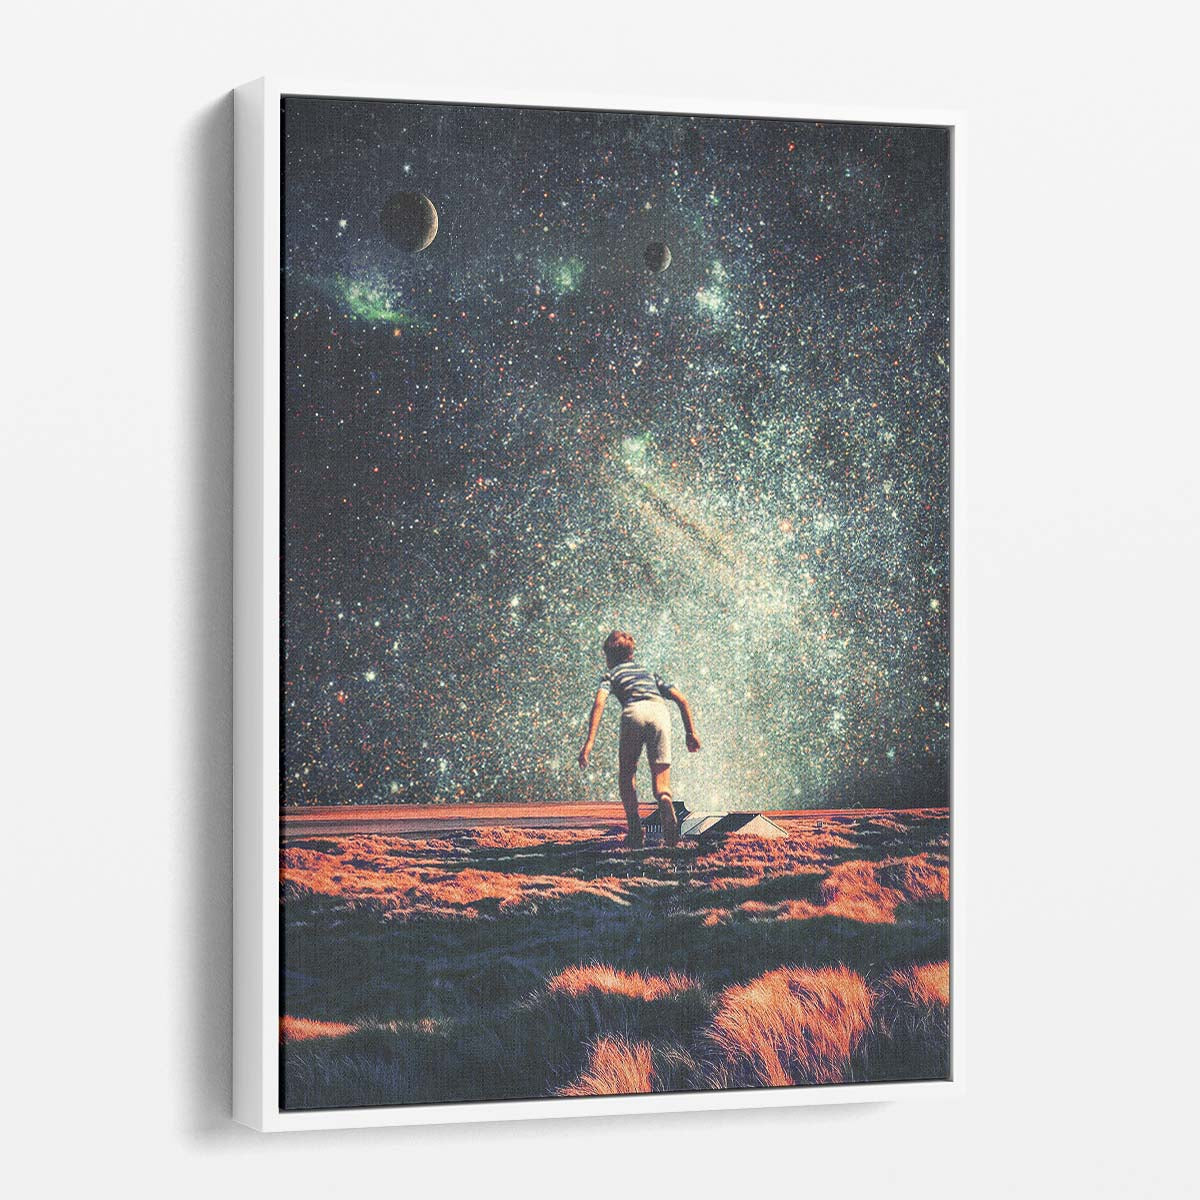 Child's Surreal Universe, Retro Futuristic Starry Night Digital Collage Art by Luxuriance Designs, made in USA